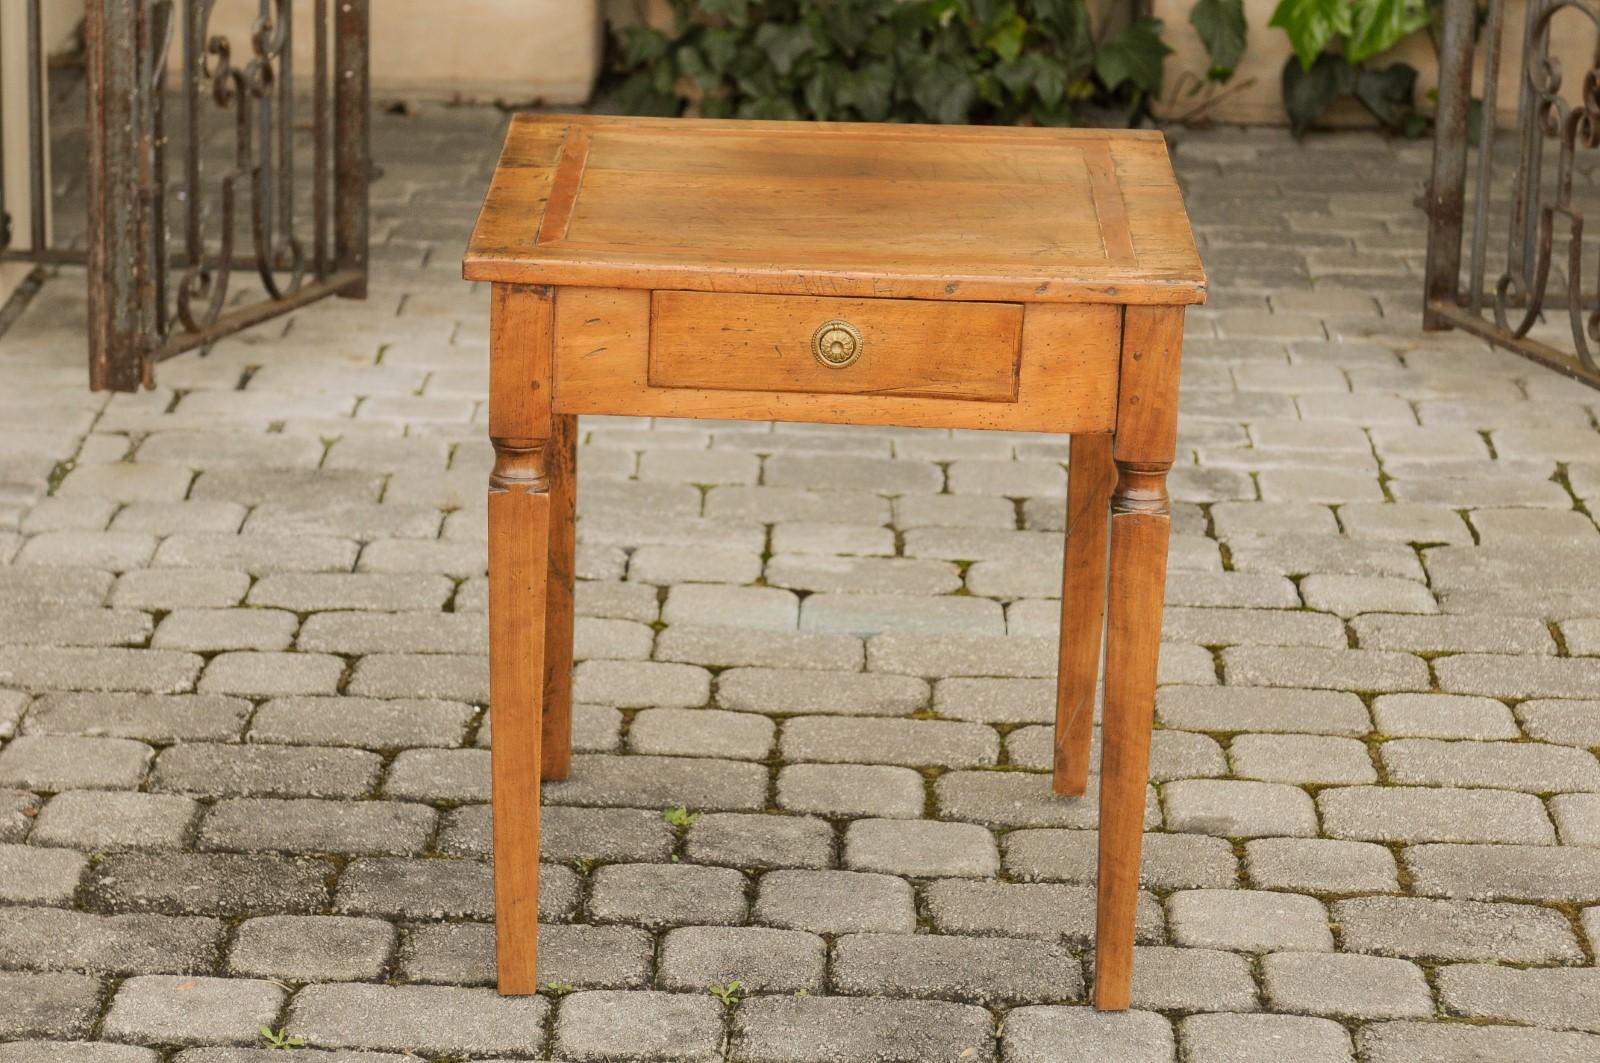 An Italian walnut neoclassical period side table from circa 1820, with single drawer and tapered legs. Born in Italy during the second decade of the 19th century, this exquisite walnut neoclassical period side table captures the essence of refined